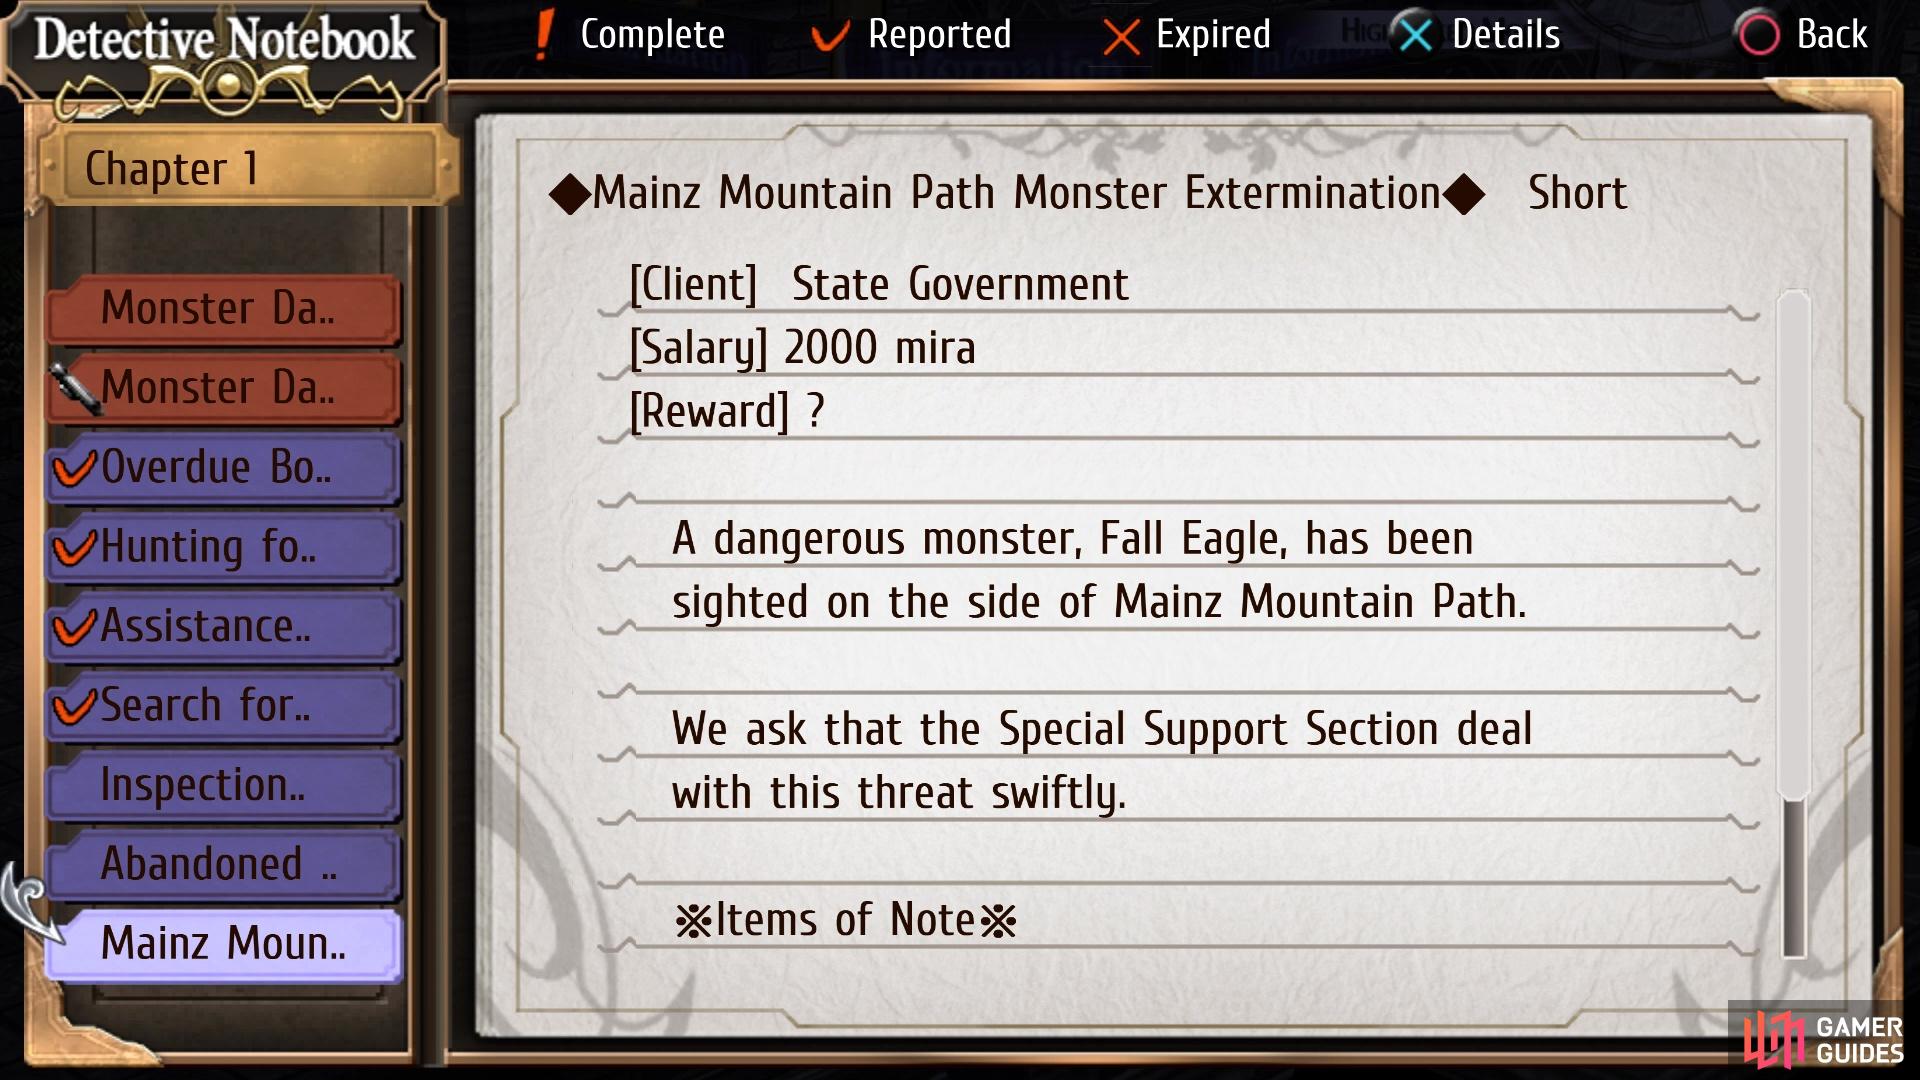 This request requires you to kill a specific monster